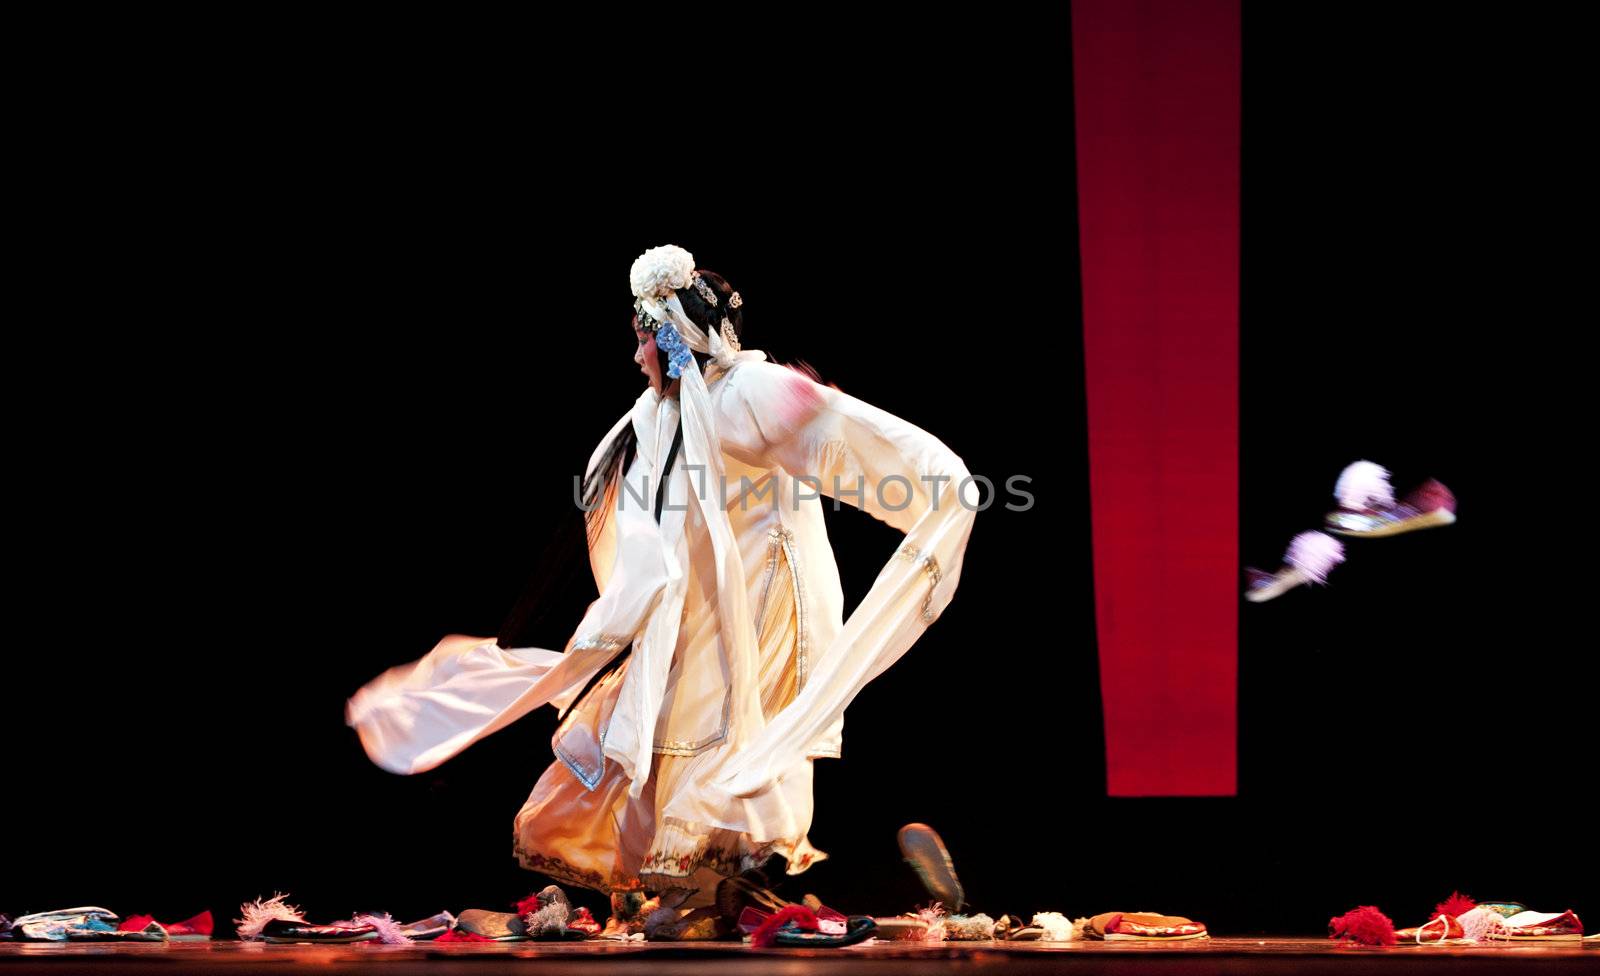 CHENGDU - SEPT 29: chinese famous opera artist Tian Mansha performs Concept opera Sigh on stage at JinSha theater Sept 29, 2011 in Chengdu, China.